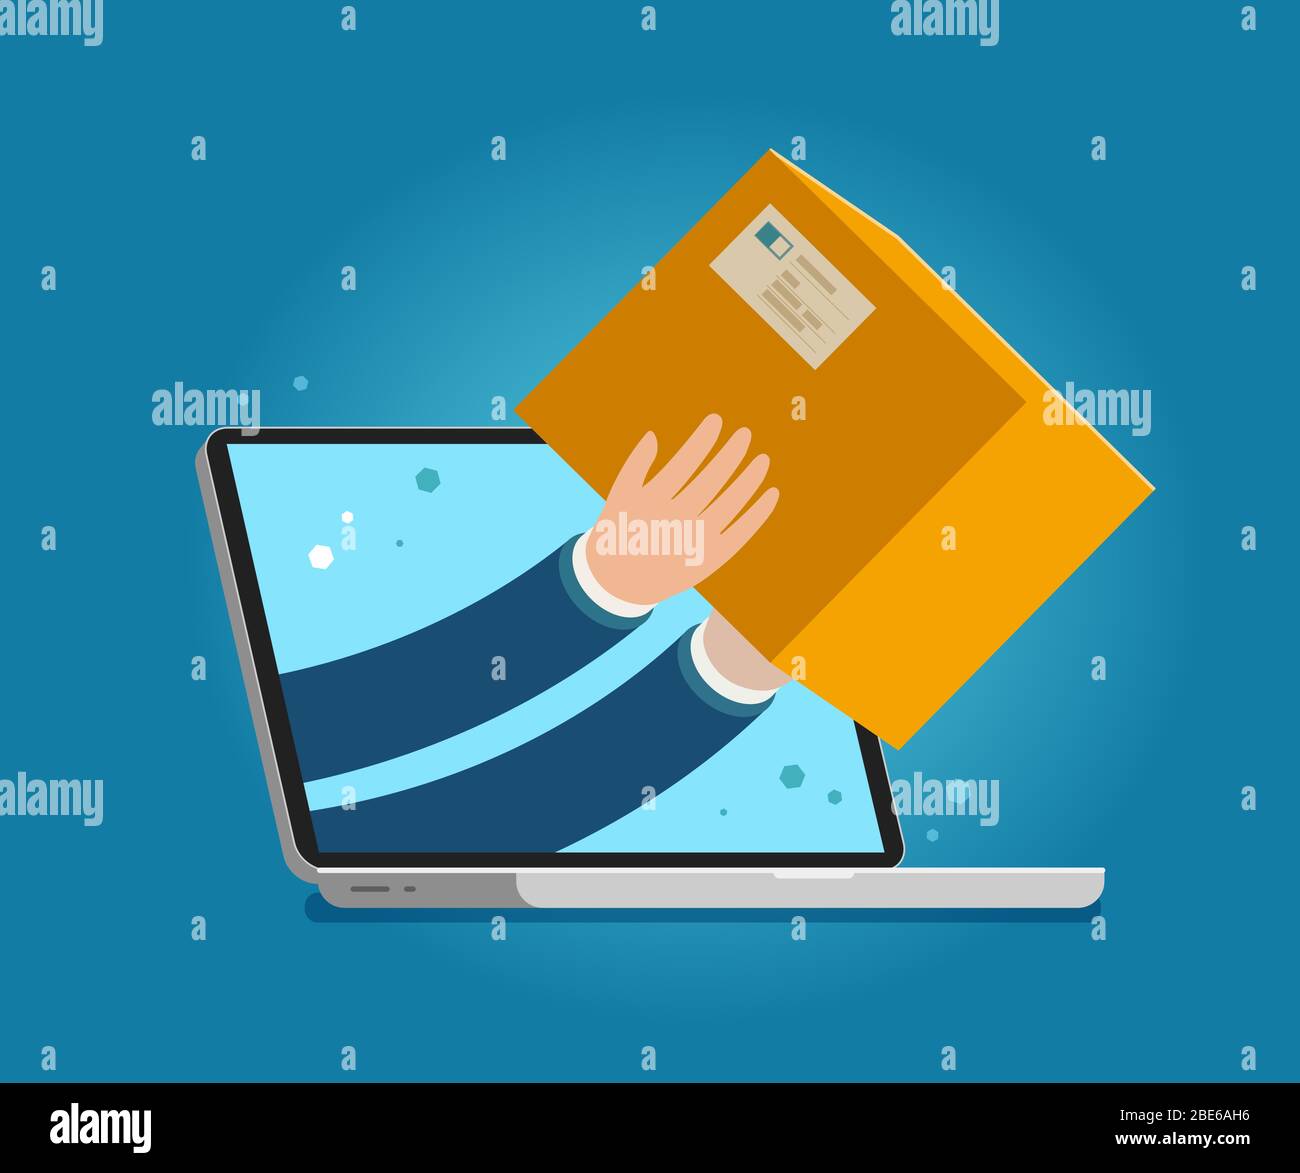 Delivery issued through web application on laptop. Business vector illustration Stock Vector